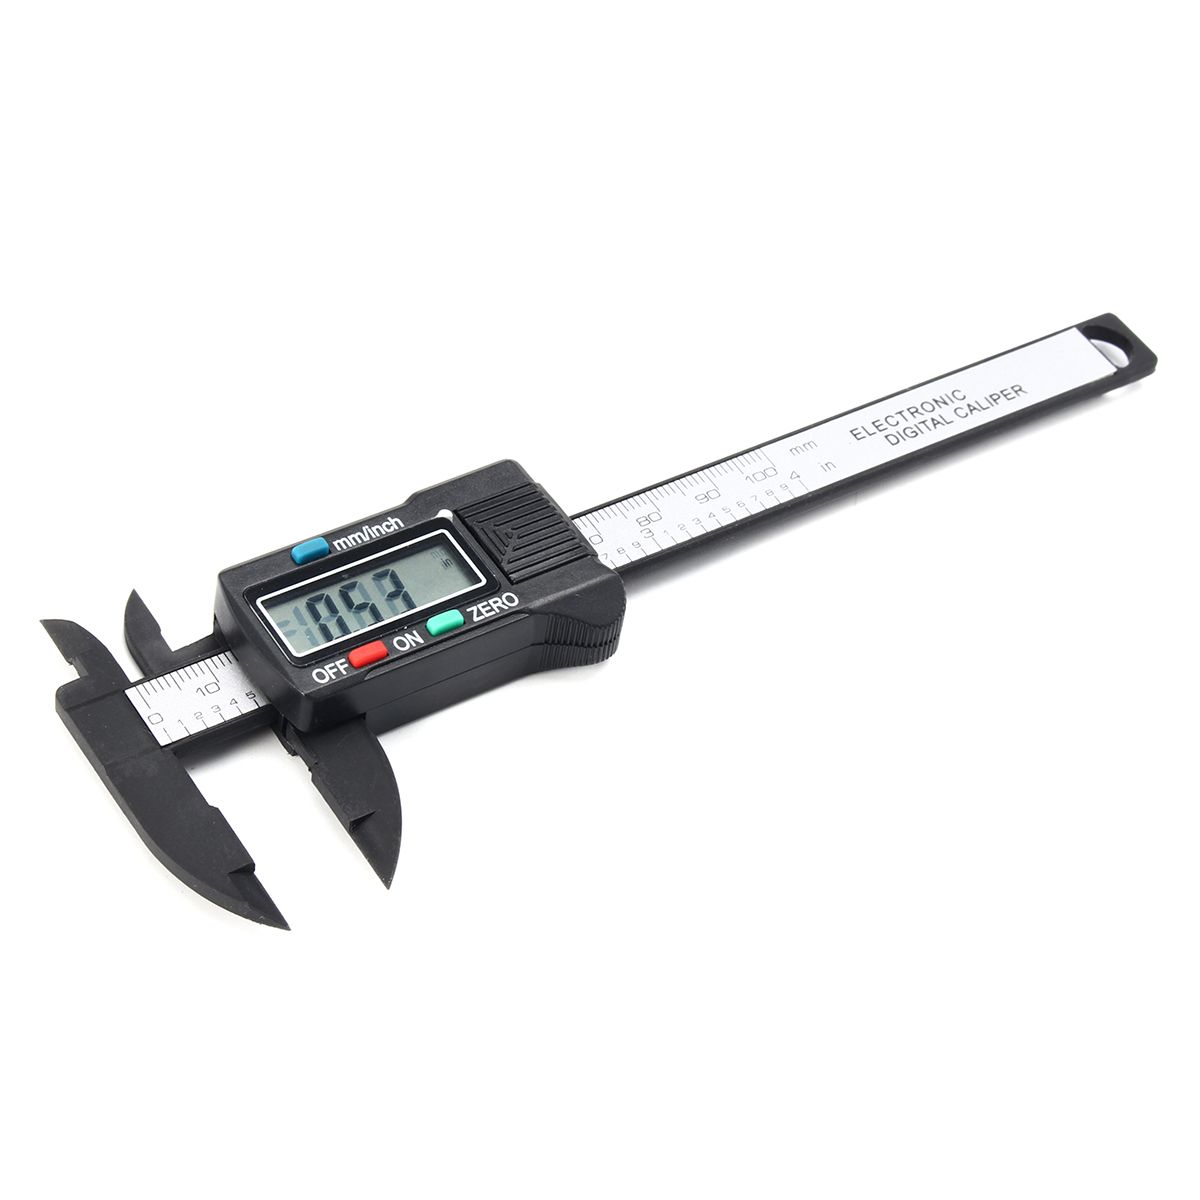 Stainless-Steel-Electronic-Vernier-Micrometer-Guage-Tool-with-LCD-Screen-Display-150mm-100mm-1255385